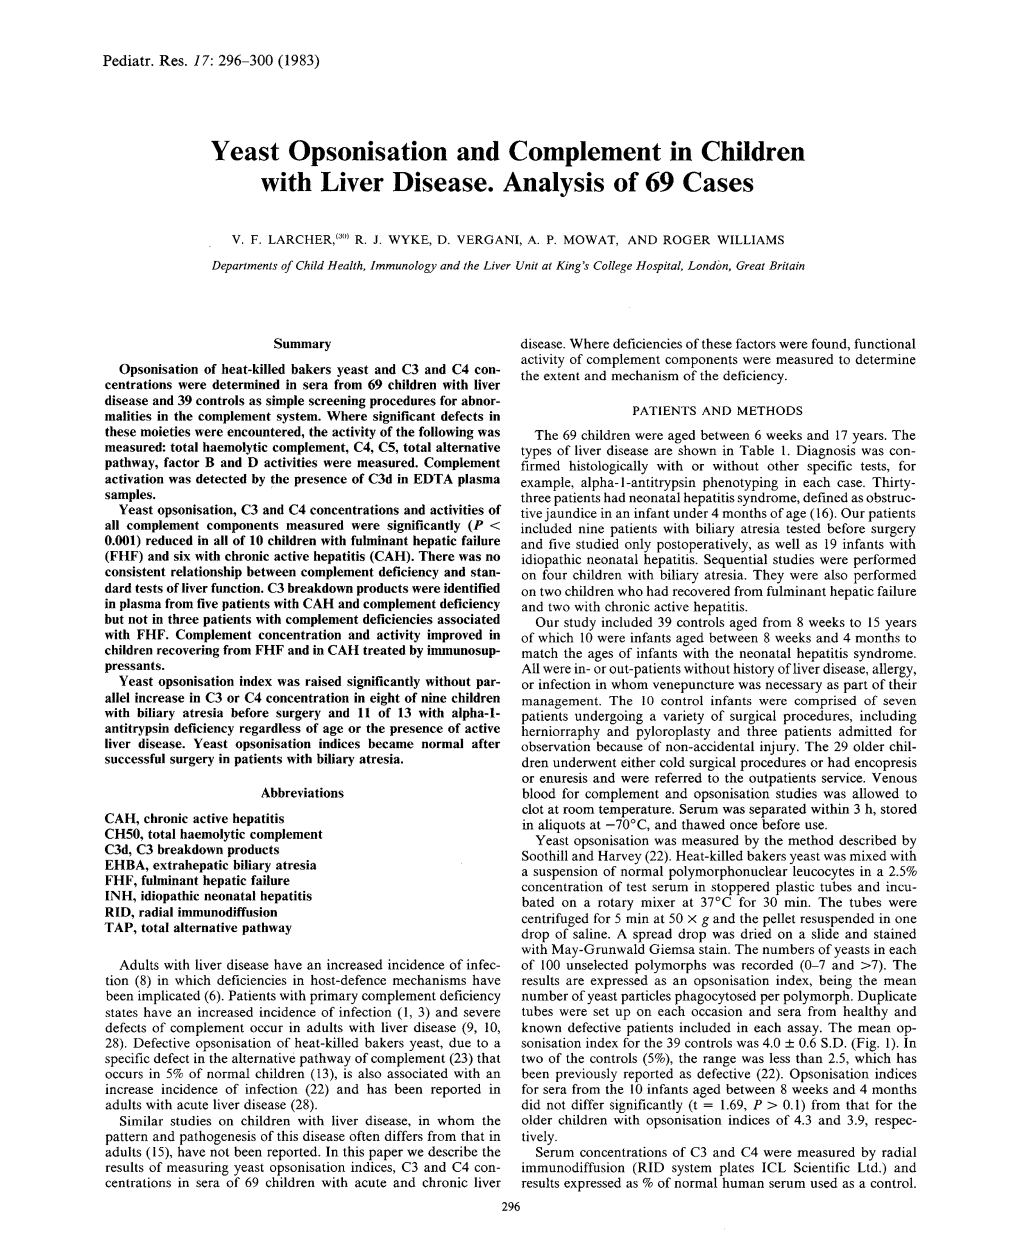 Yeast Opsonisation and Complement in Children with Liver Disease